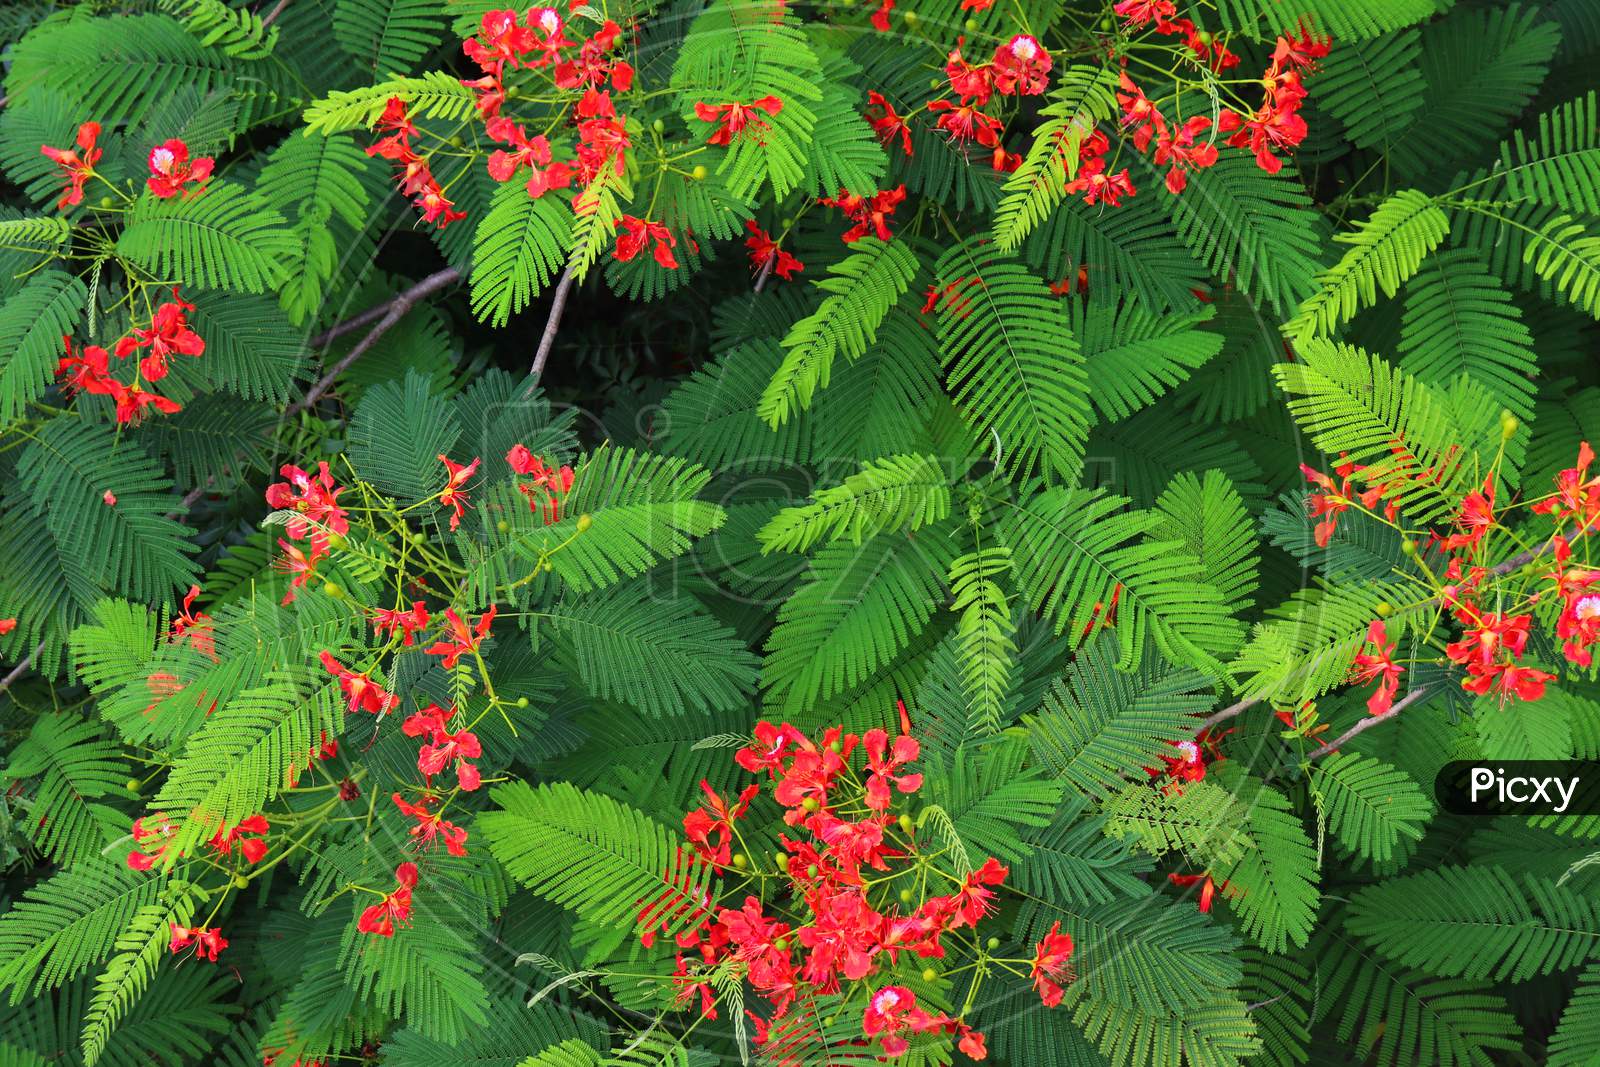 beautiful red Caesalpinia pulcherrima is a species of flowering plant in the pea family Fabaceaebeautiful red Caesalpinia pulcherrima is a species of flowering plant in the pea family Fabaceae